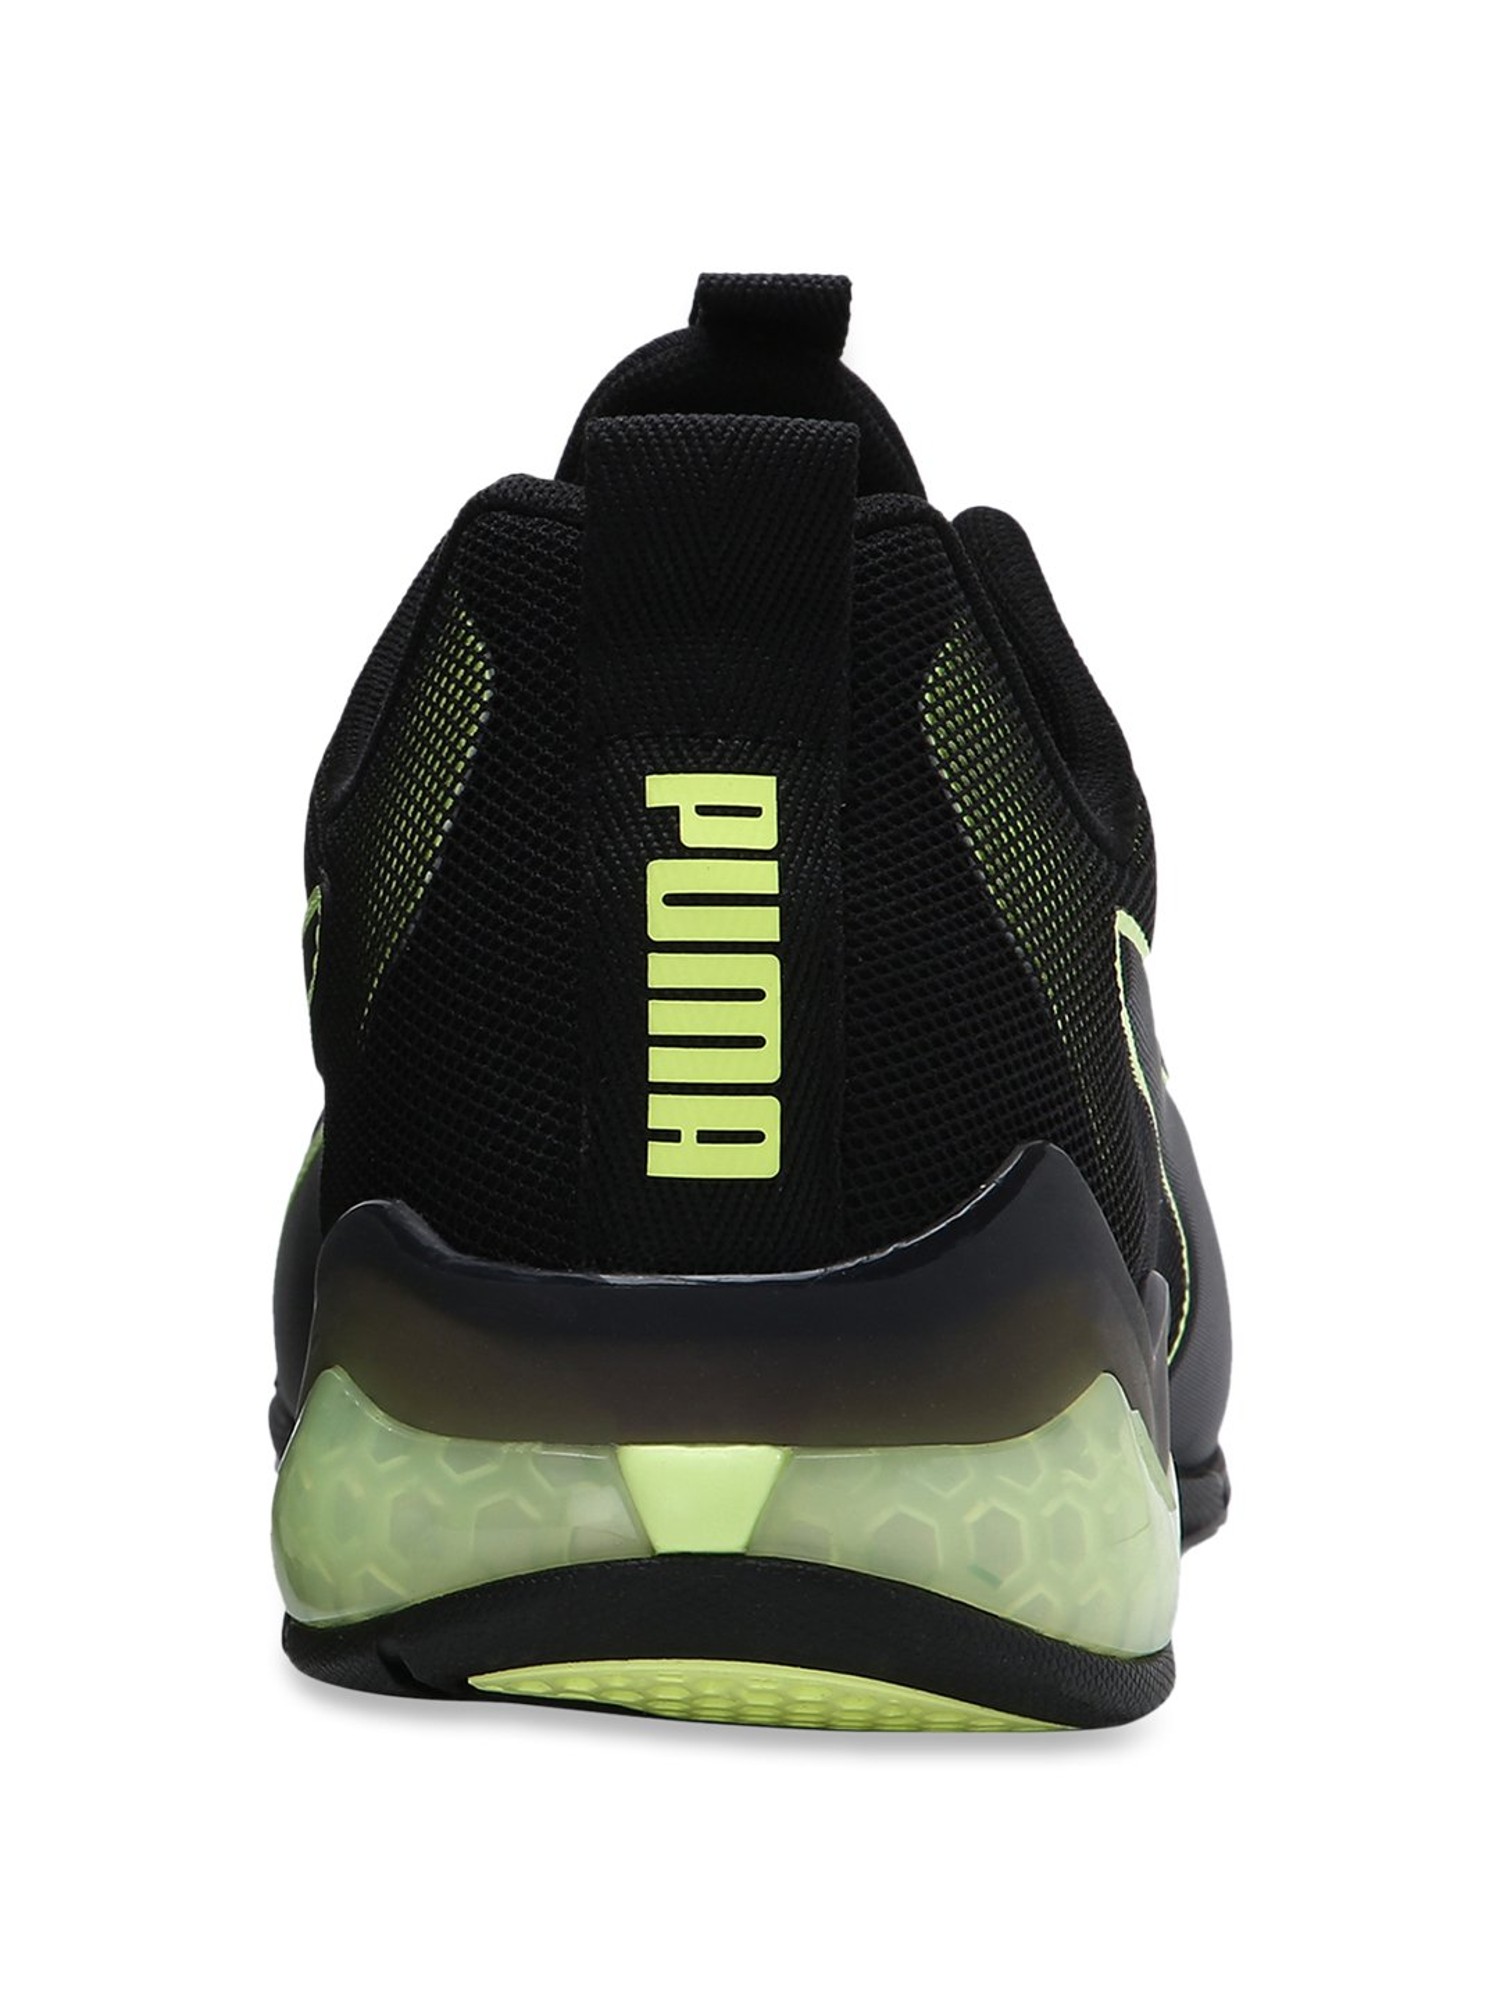 Puma Cell Valiant Black Running Shoes top Brands at Best Prices Online in India | Tata CLiQ